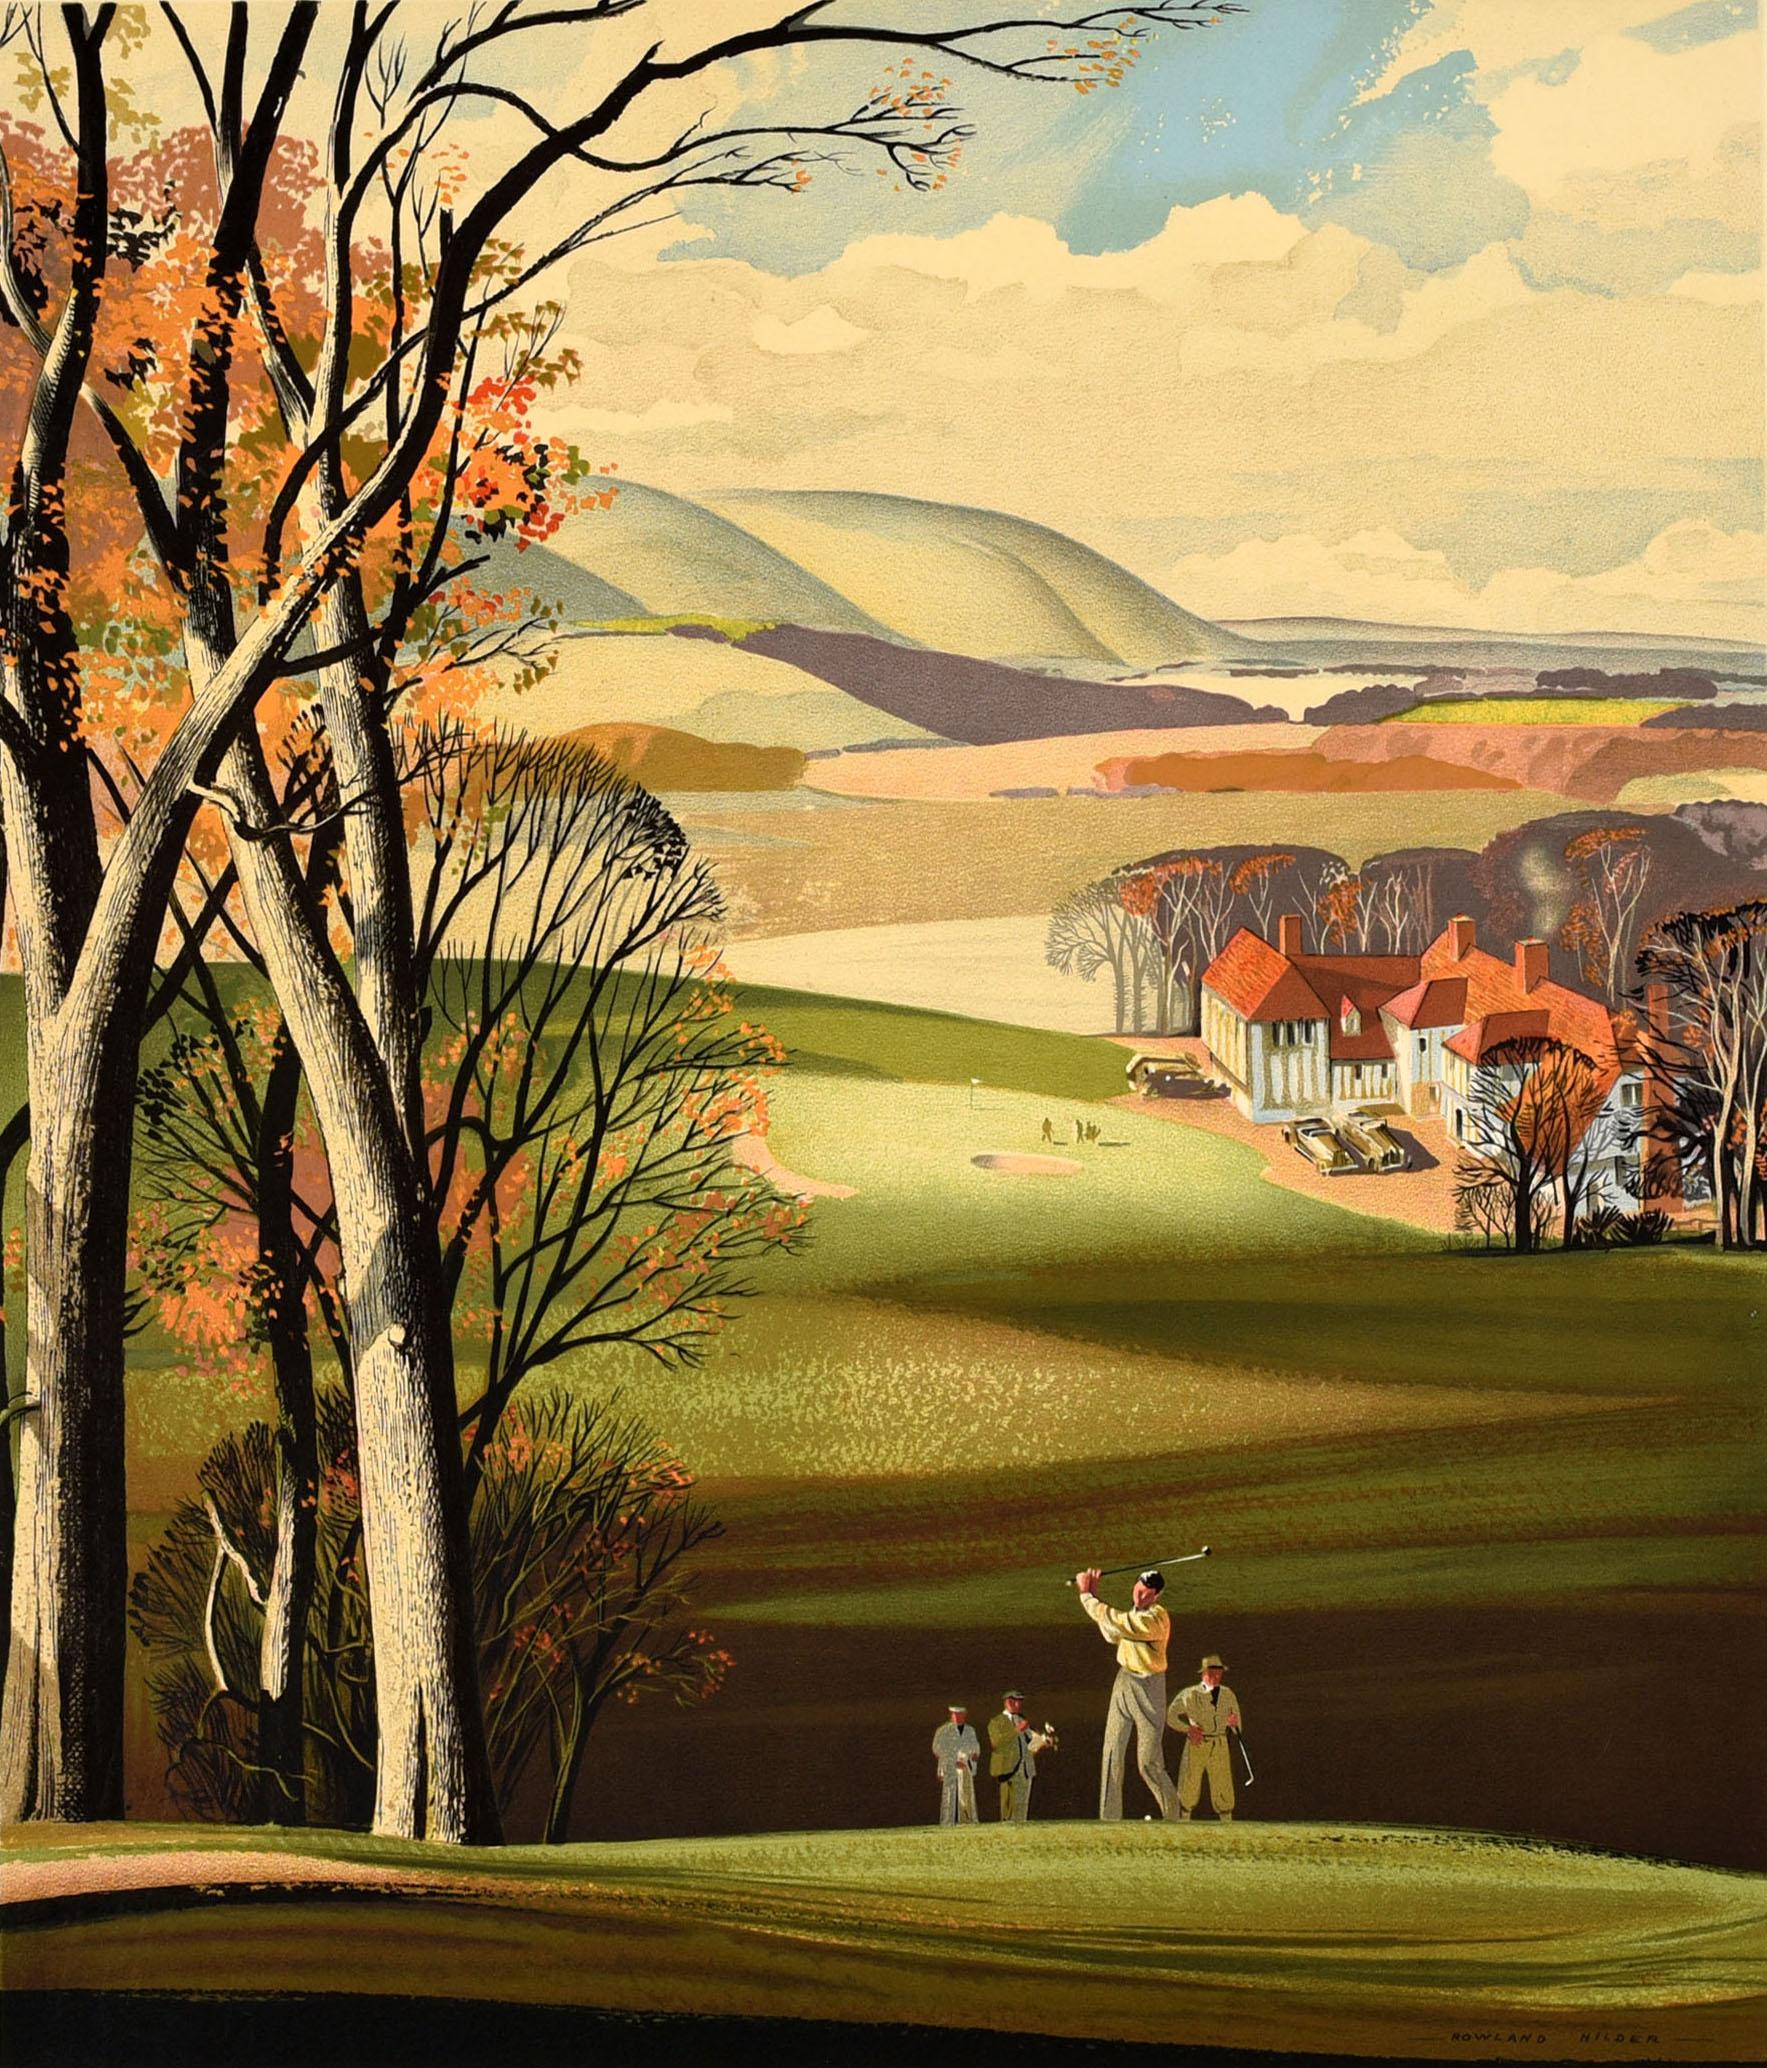 Original vintage sport themed travel poster - Come to Britain for Golf - Artwork by the notable British painter Rowland Hilder (1905-1933) featuring four men playing golf alongside autumnal trees. Another group of men can be seen putting on the